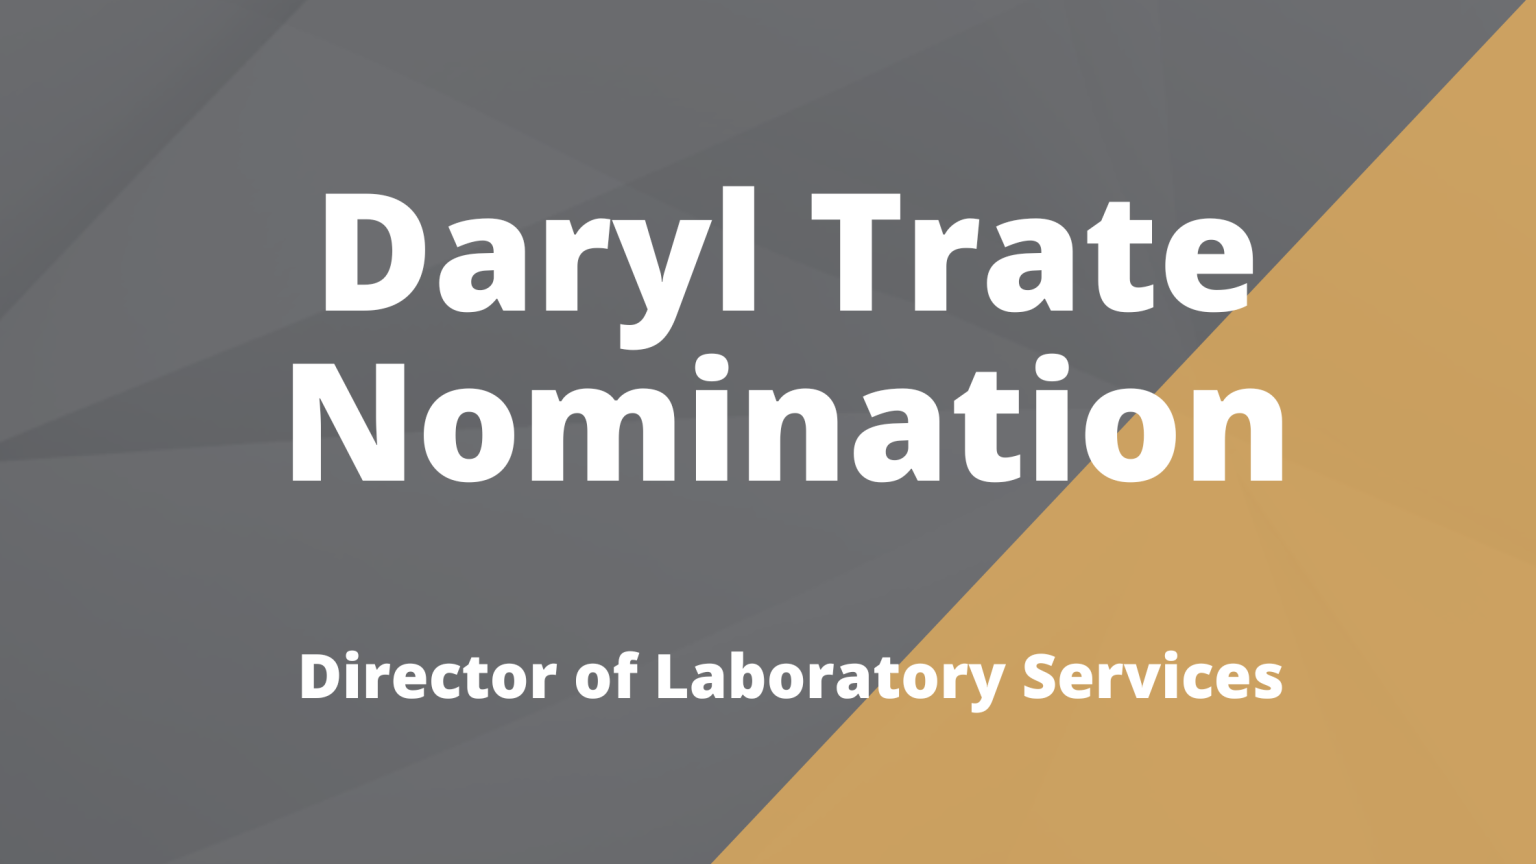 As SYNERGX continues to expand across the United States and as part of its 2023 market development strategy, we are pleased to announce that Daryl Trate has joined our team as Director of Laboratory Services.